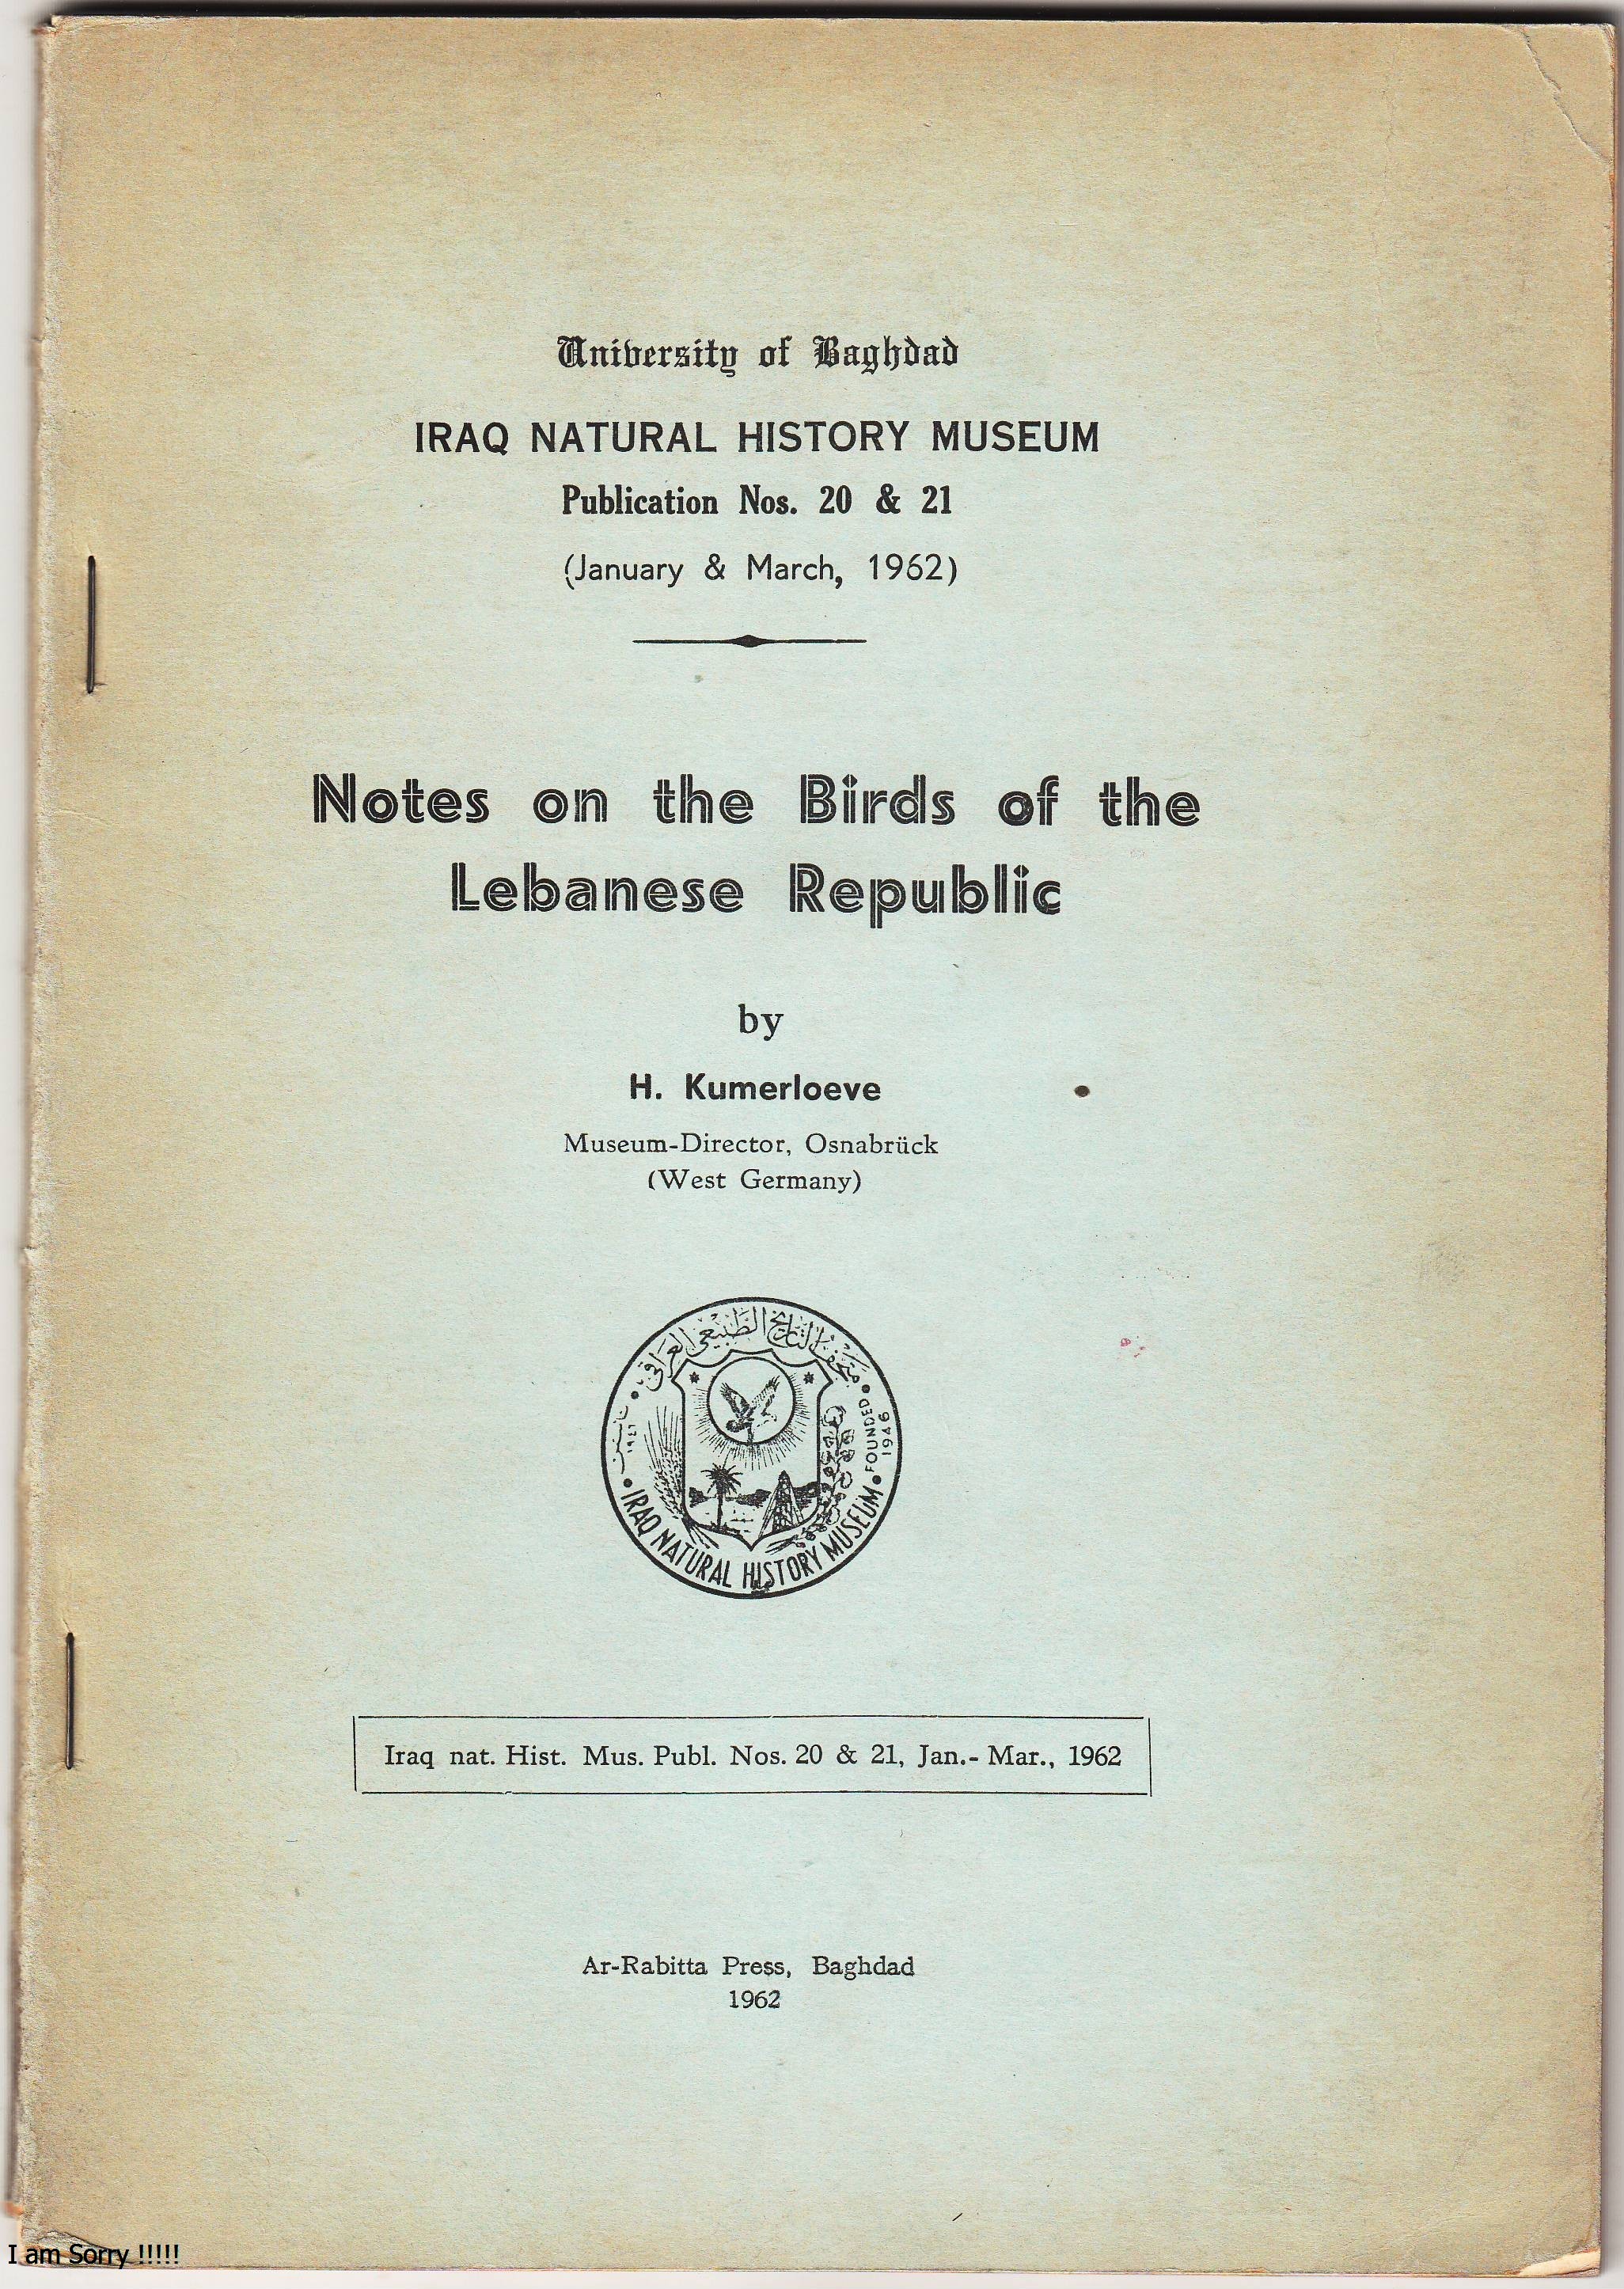 					View No. 20&21 (1962): Notes on the Birds of the Lebanese Republic by H. Kumerloeve Museum-Director, Osnabrück (West Germany) , Nat.Hist. Mus, Baghdad, Iraq
				